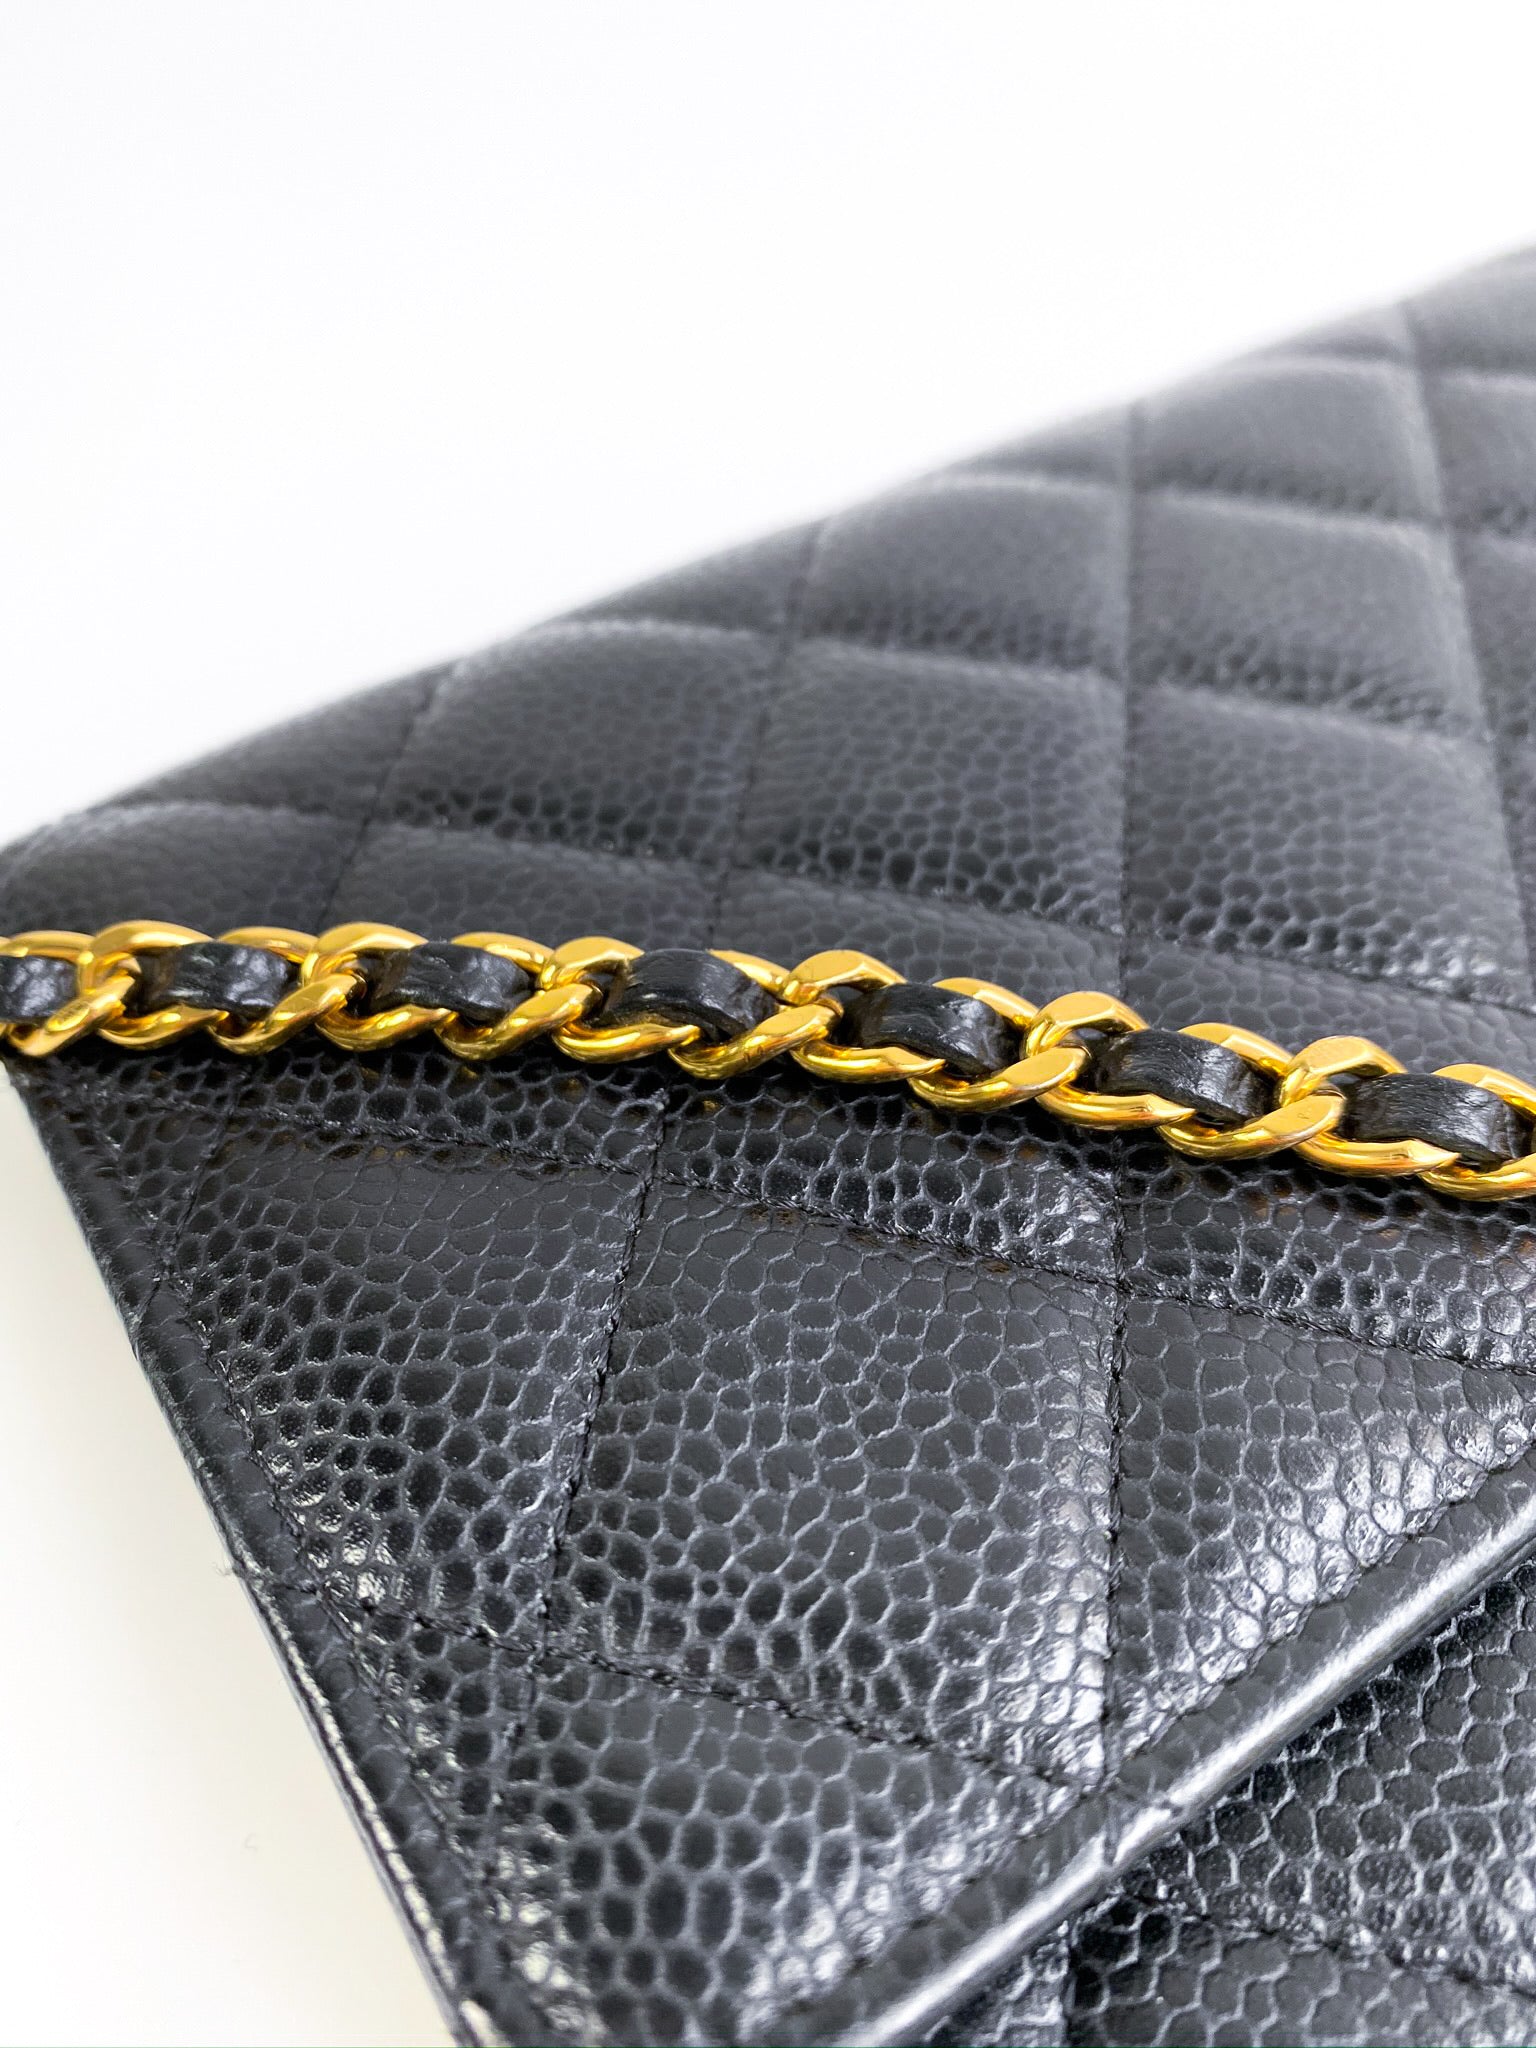 Chanel Quilted Perfect Fit Adjustable Wallet On Chain WOC Burgundy Cal –  Coco Approved Studio